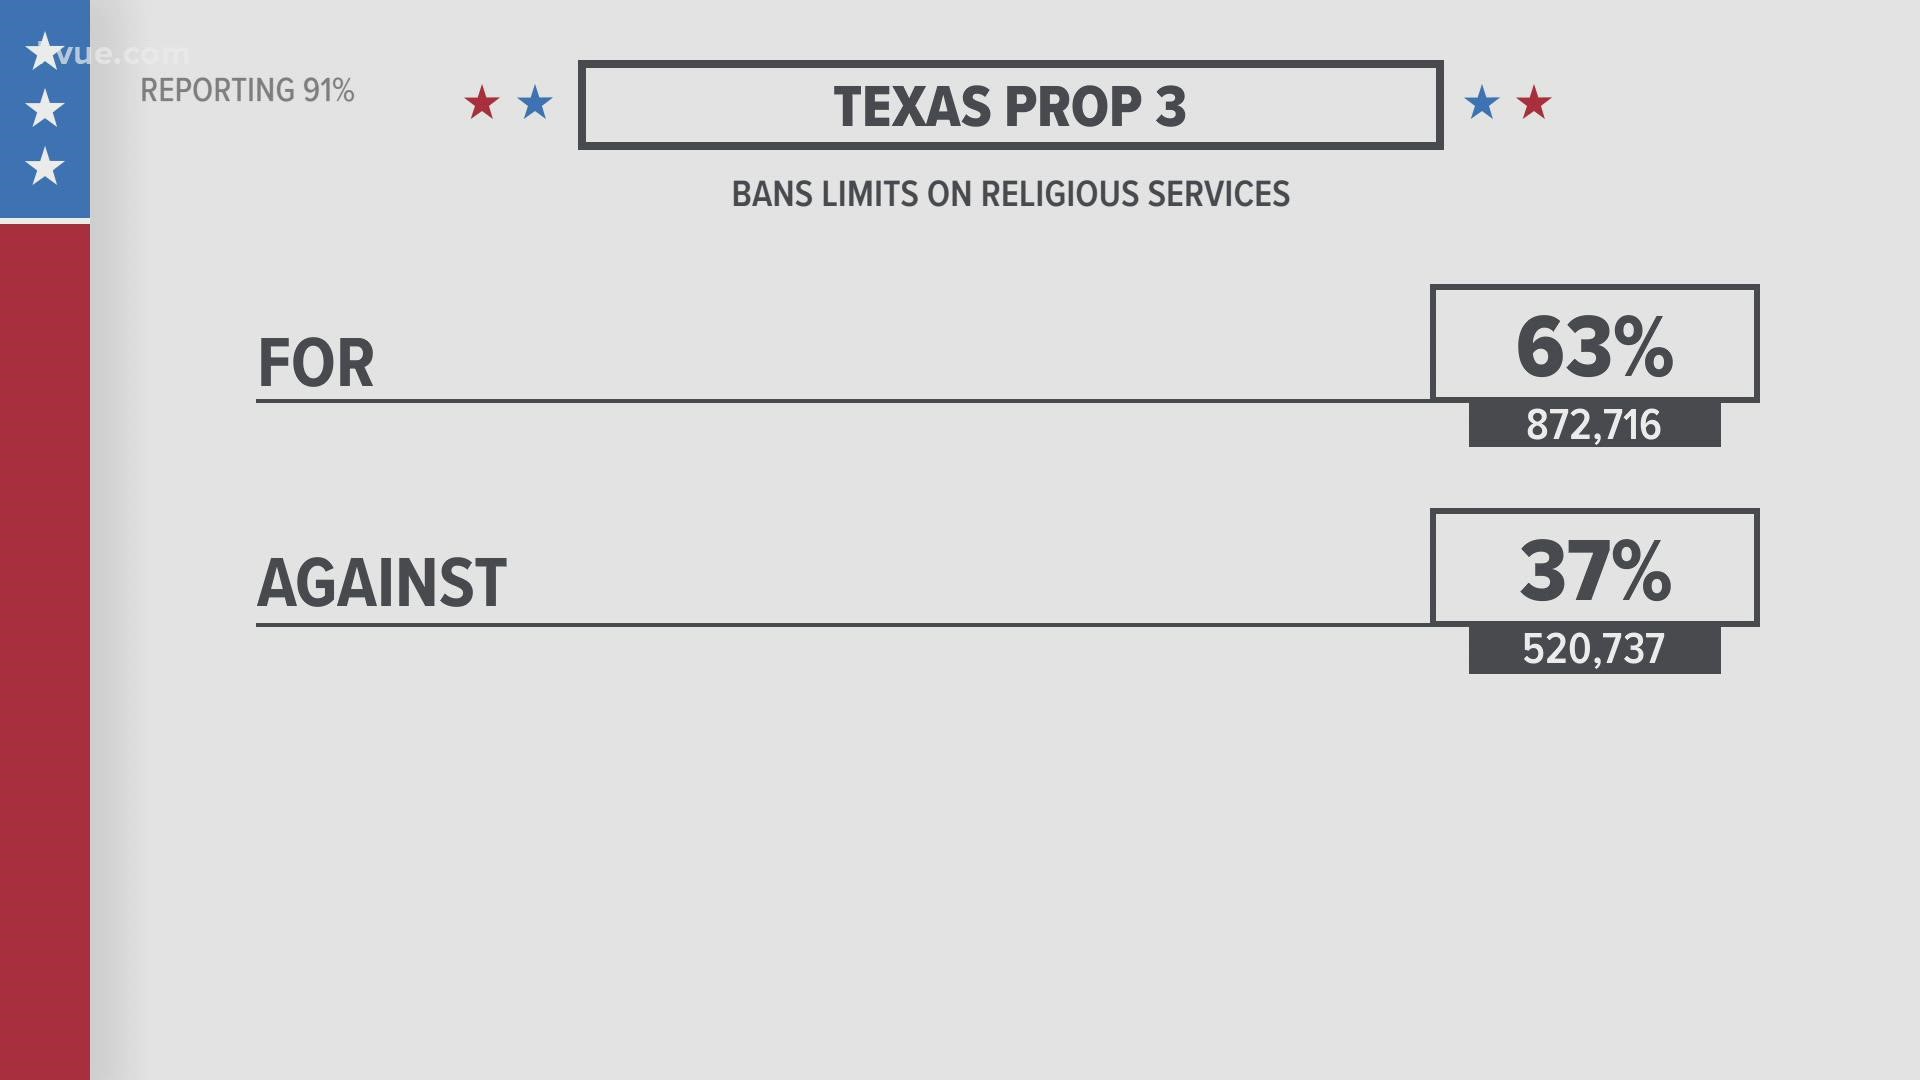 All eight propsed amendments to the Texas Constitution passed.